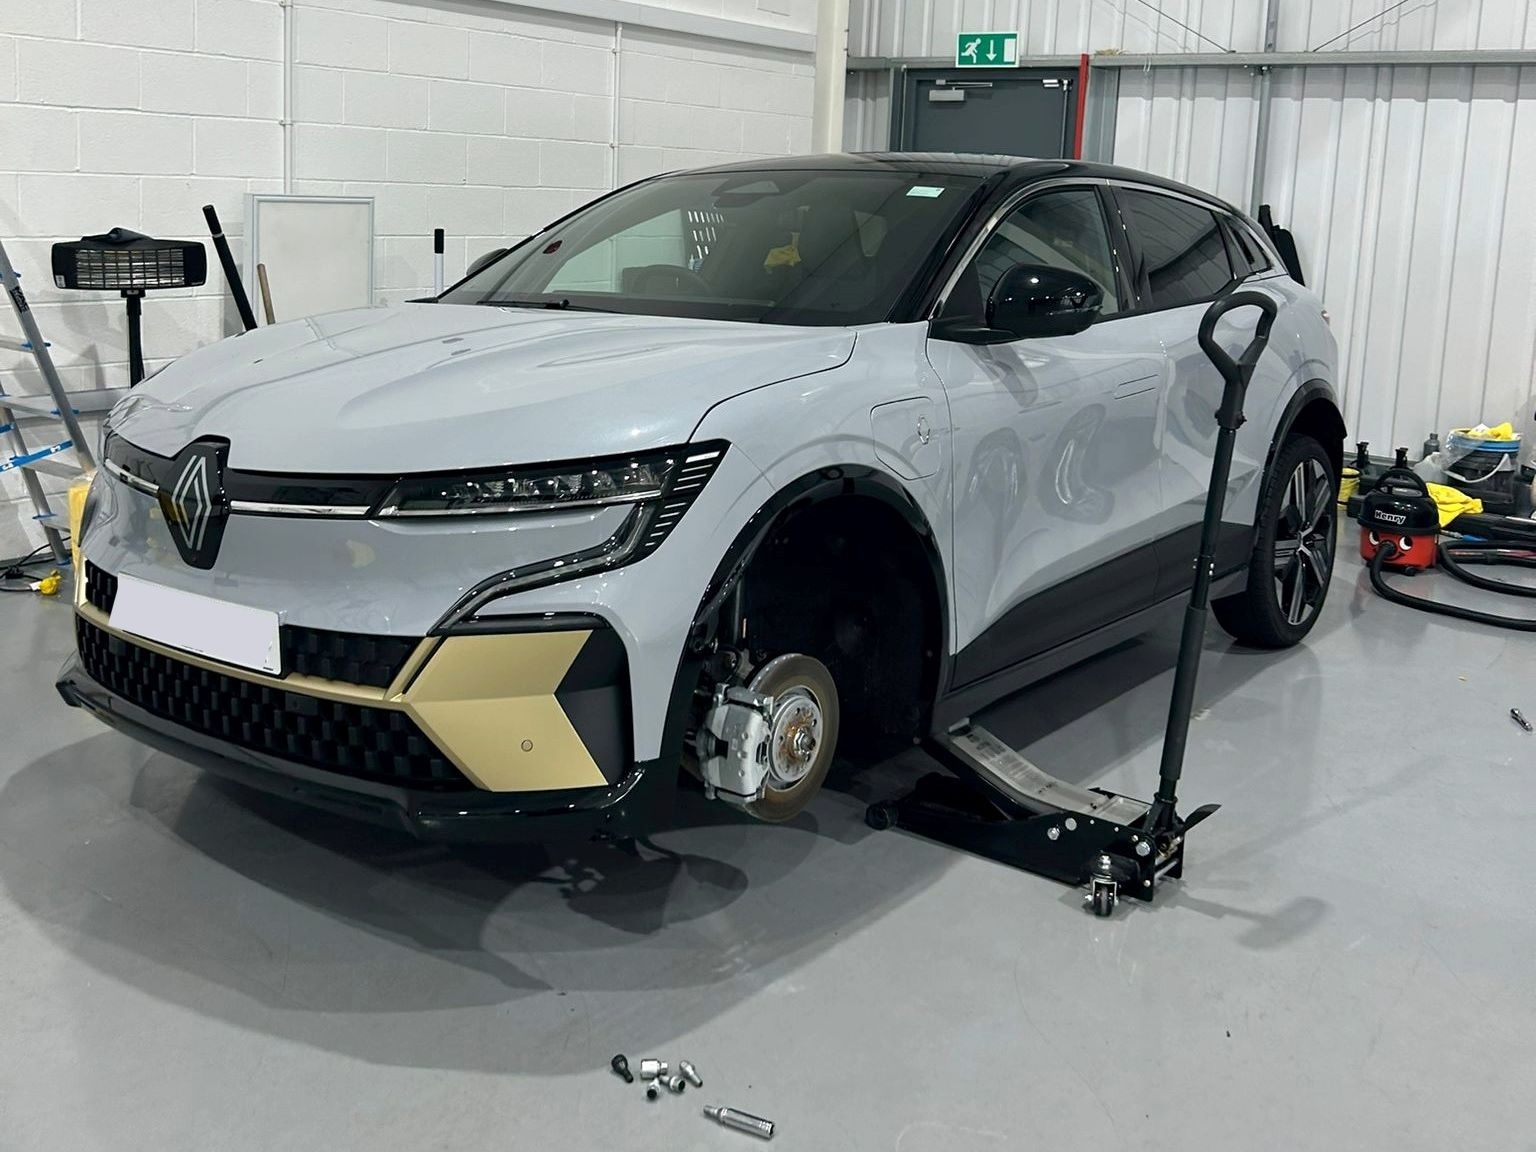 Renault Megane E-Tech 2022 electric car owner review - Electric Road